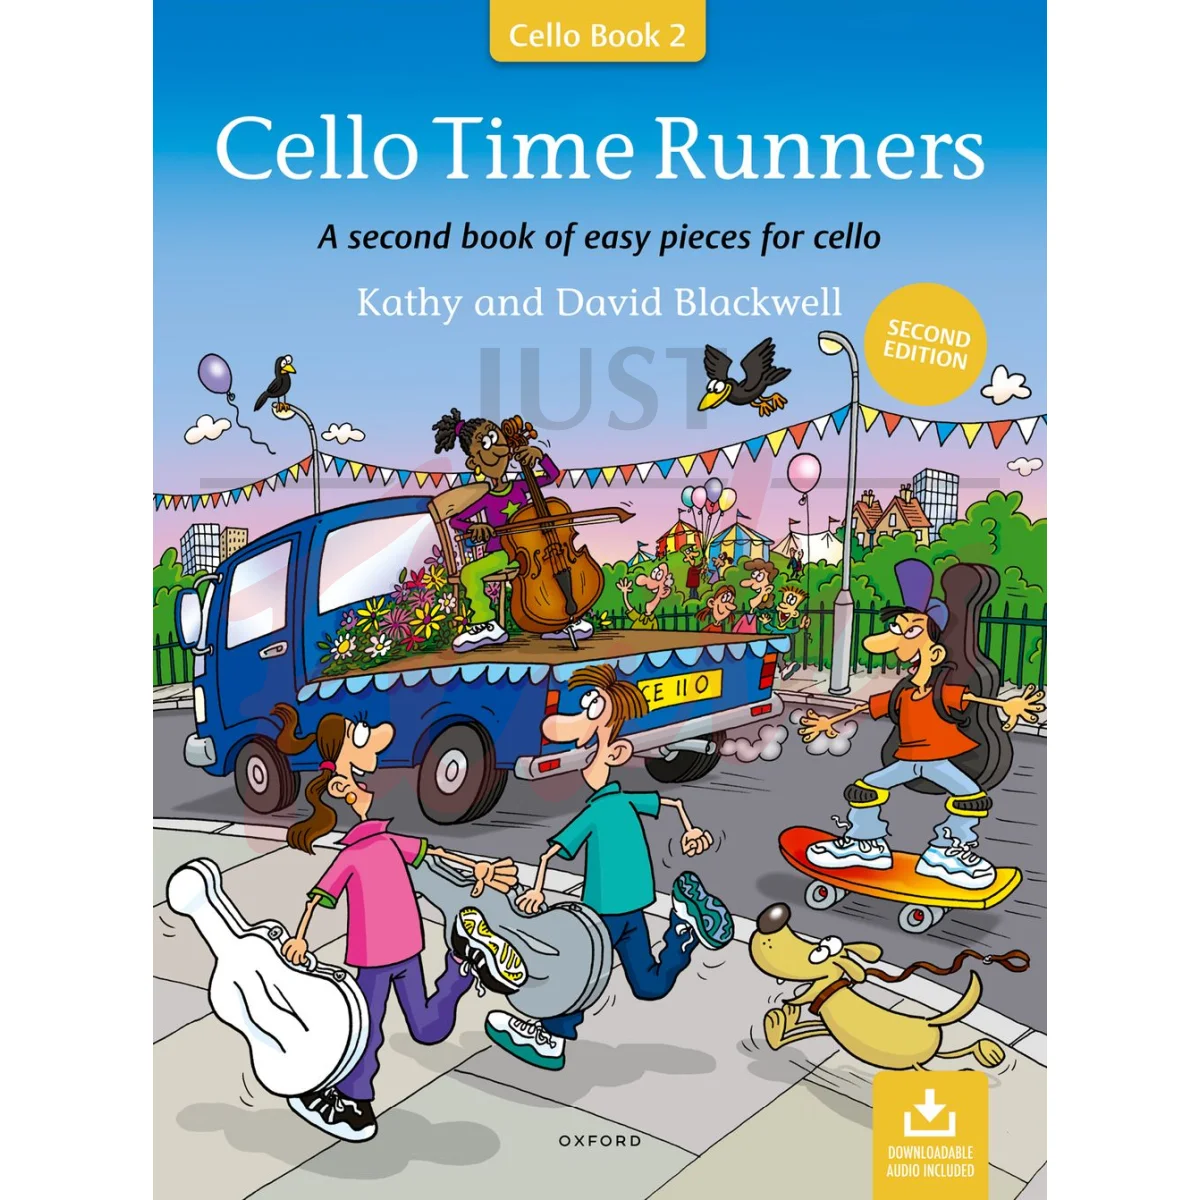 Cello Time Runners [2nd Edition]